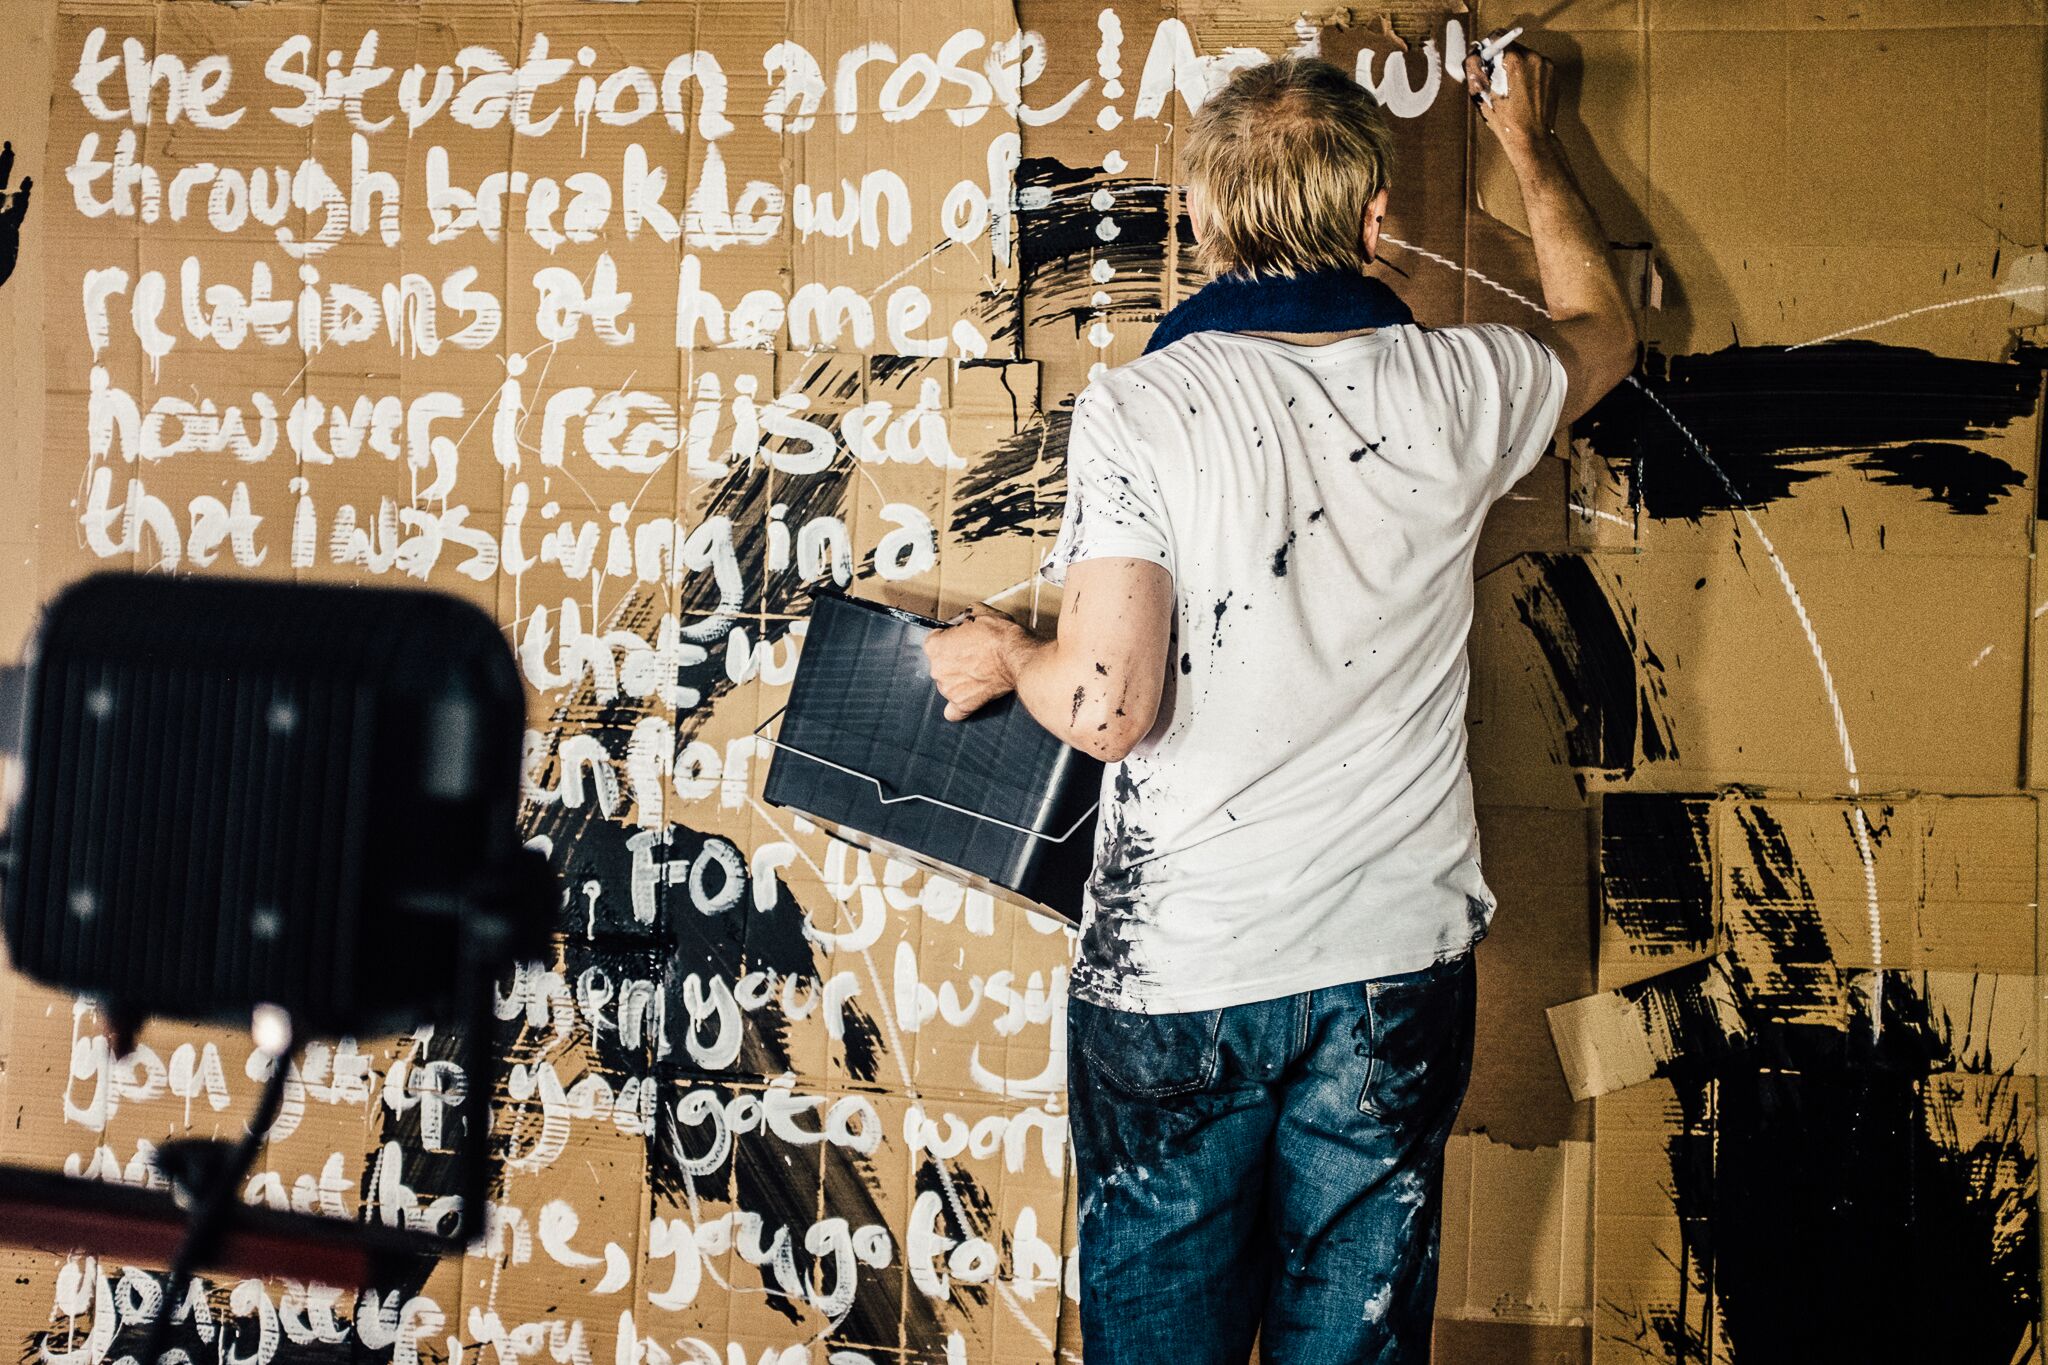 Karl Hyde covers a wall with words and phrases drawn from the street